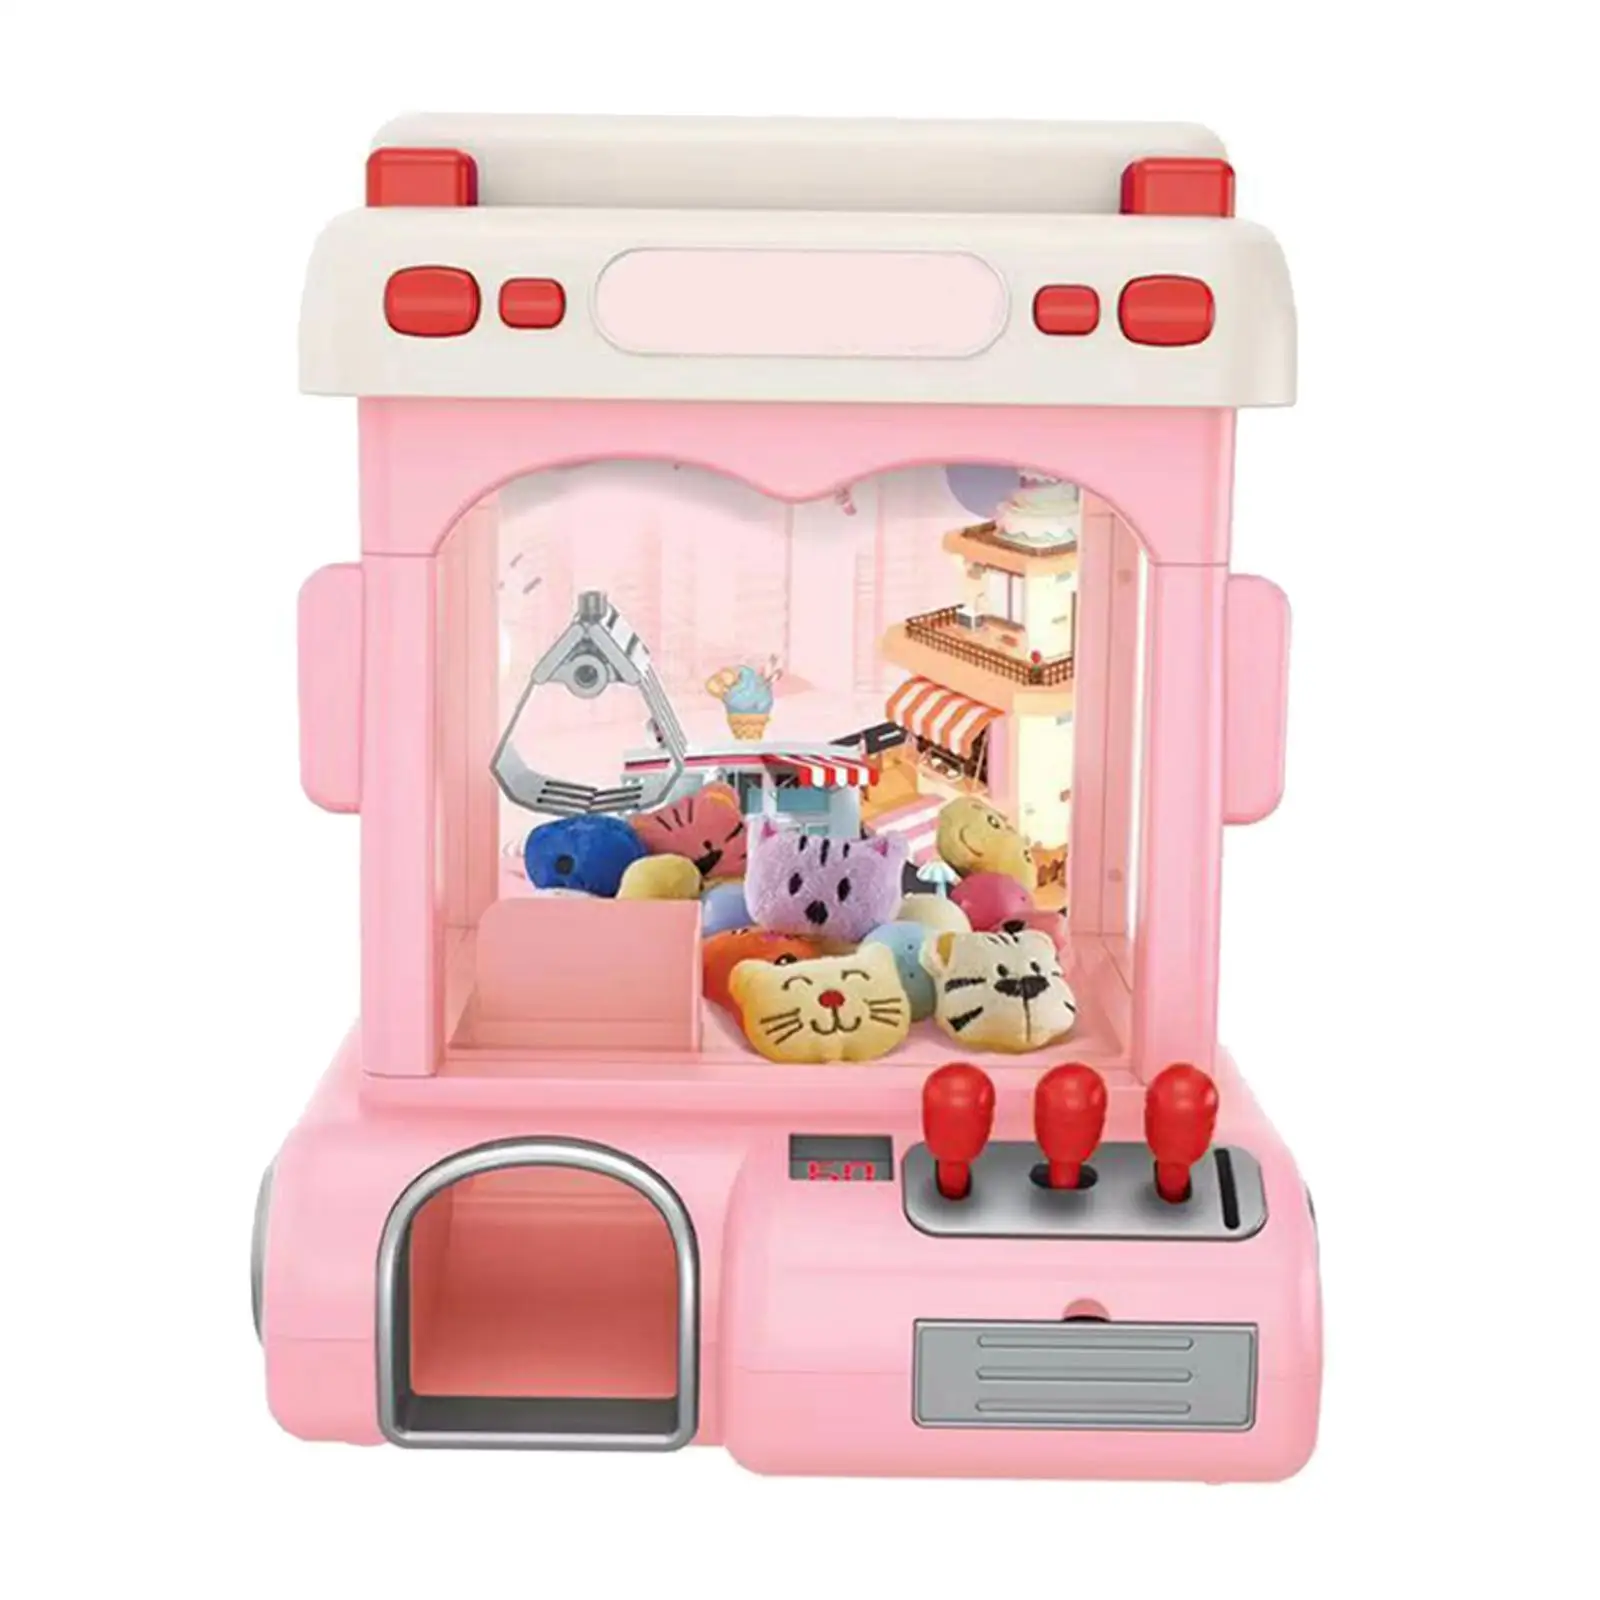 Miniature Toy Claw Machine Doll Grabber Arcade Game with 10 Balls Fun Musical Claw Game Machine for Game Birthday Child Kids